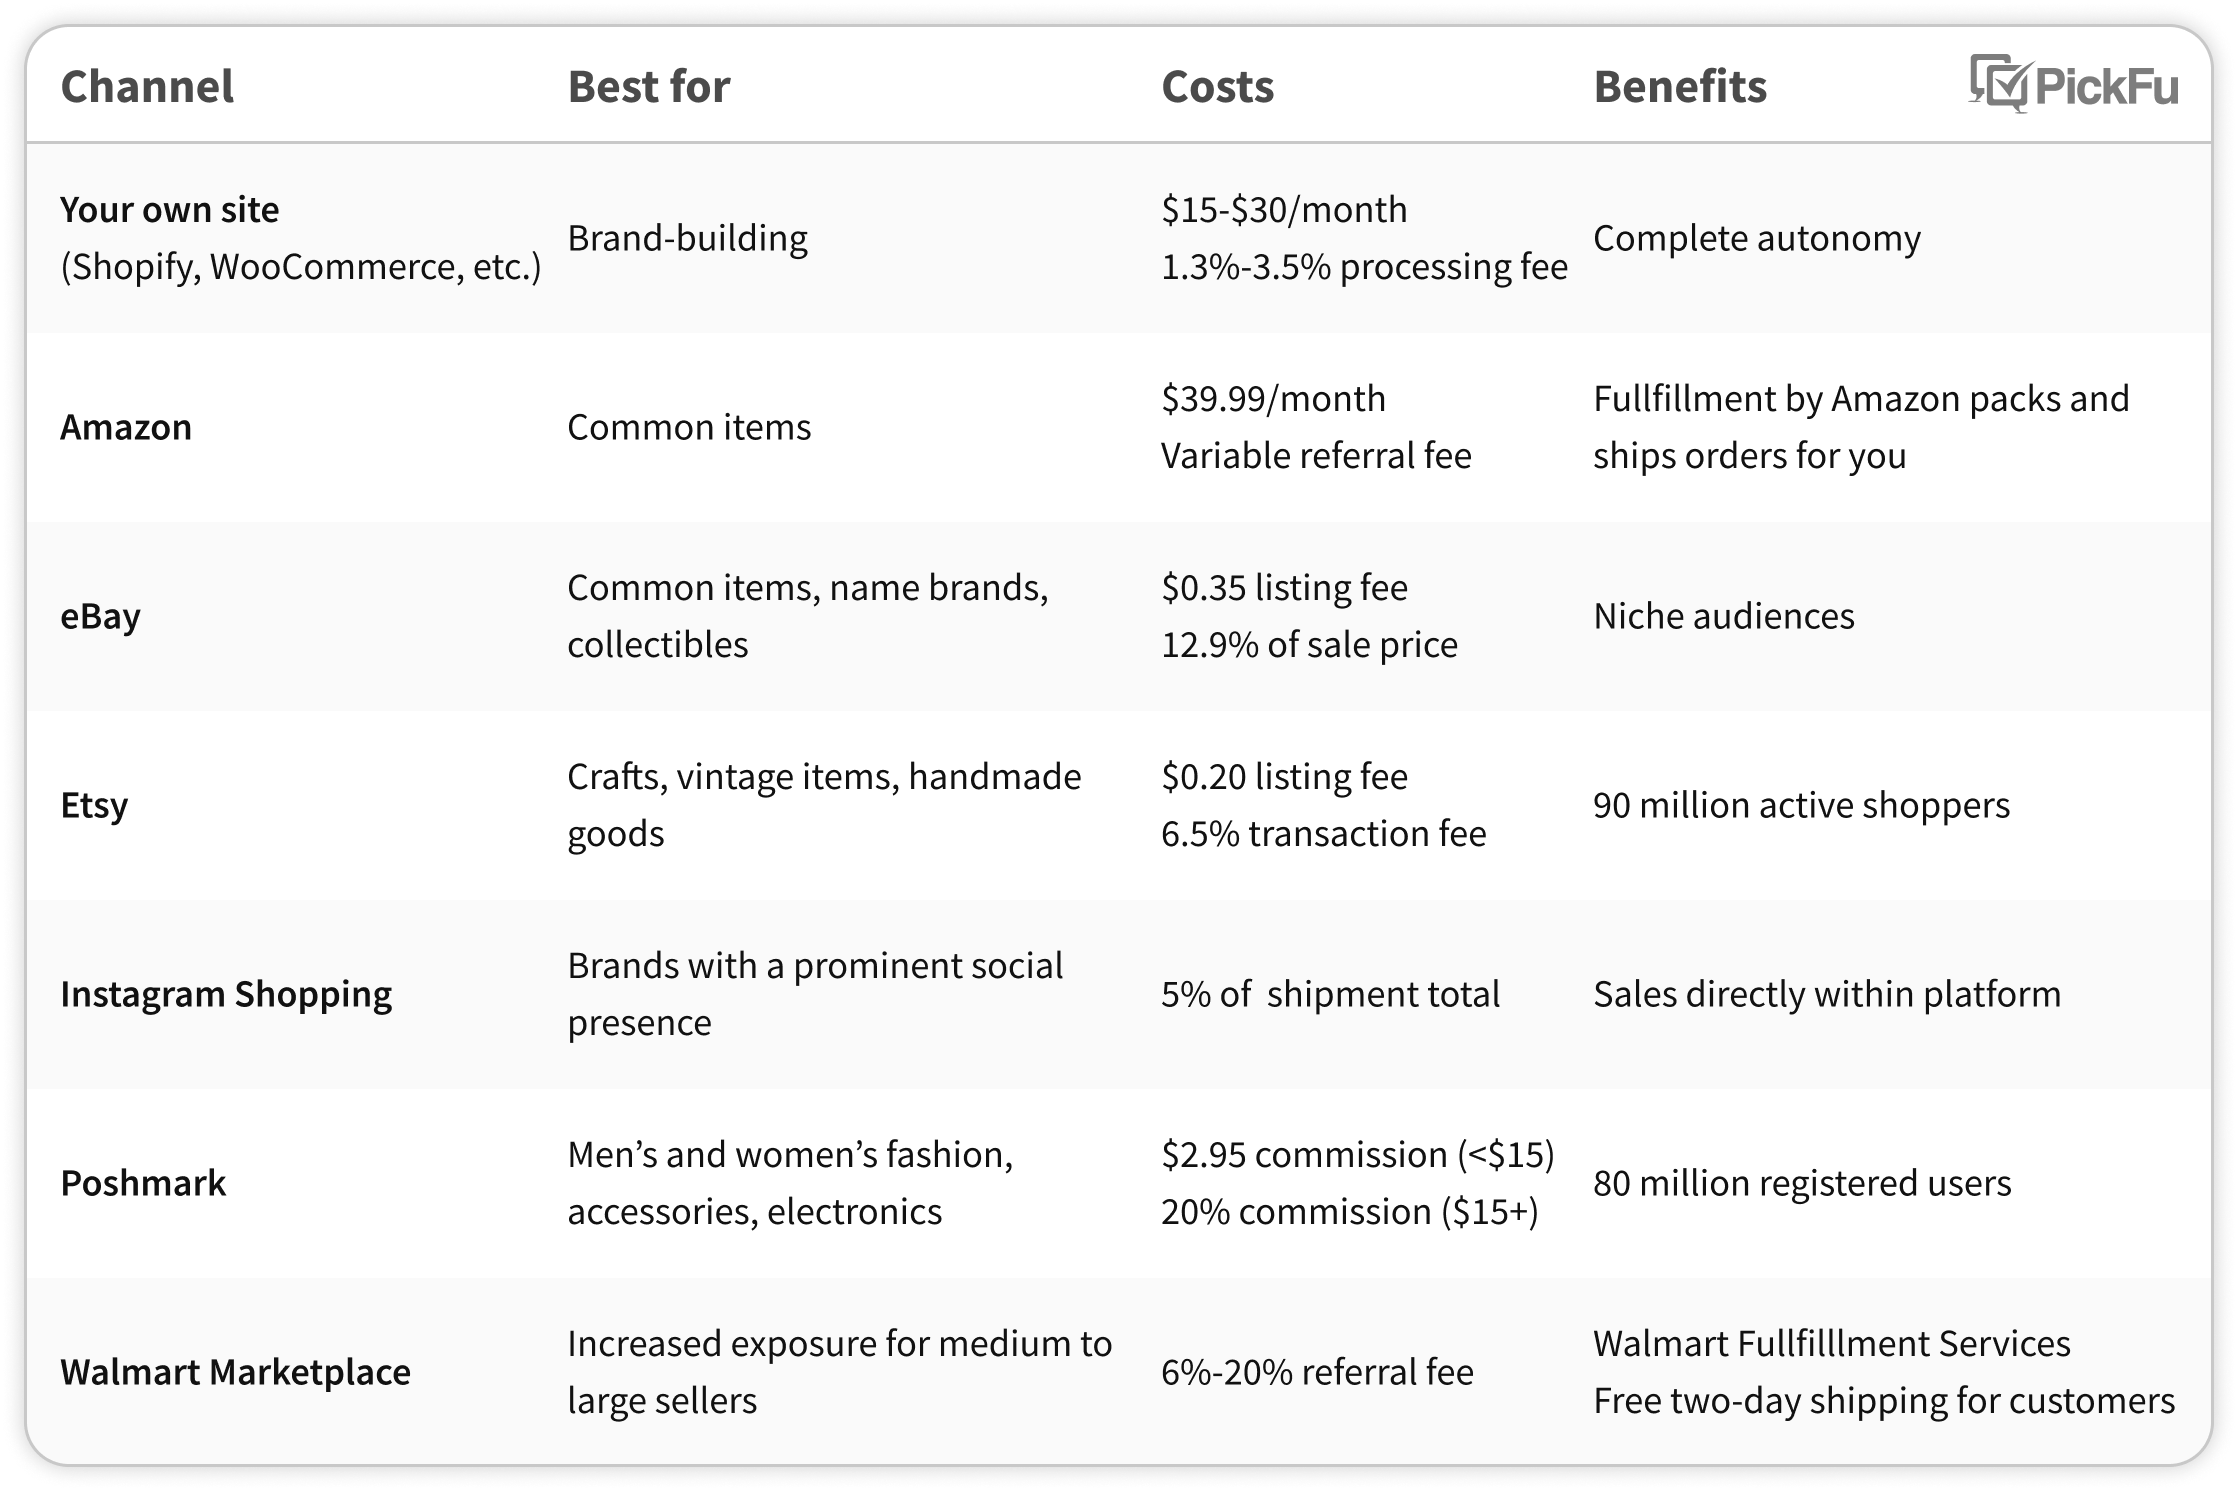 PickFu infographic comparing different e-commerce platform pros, cons, and costs